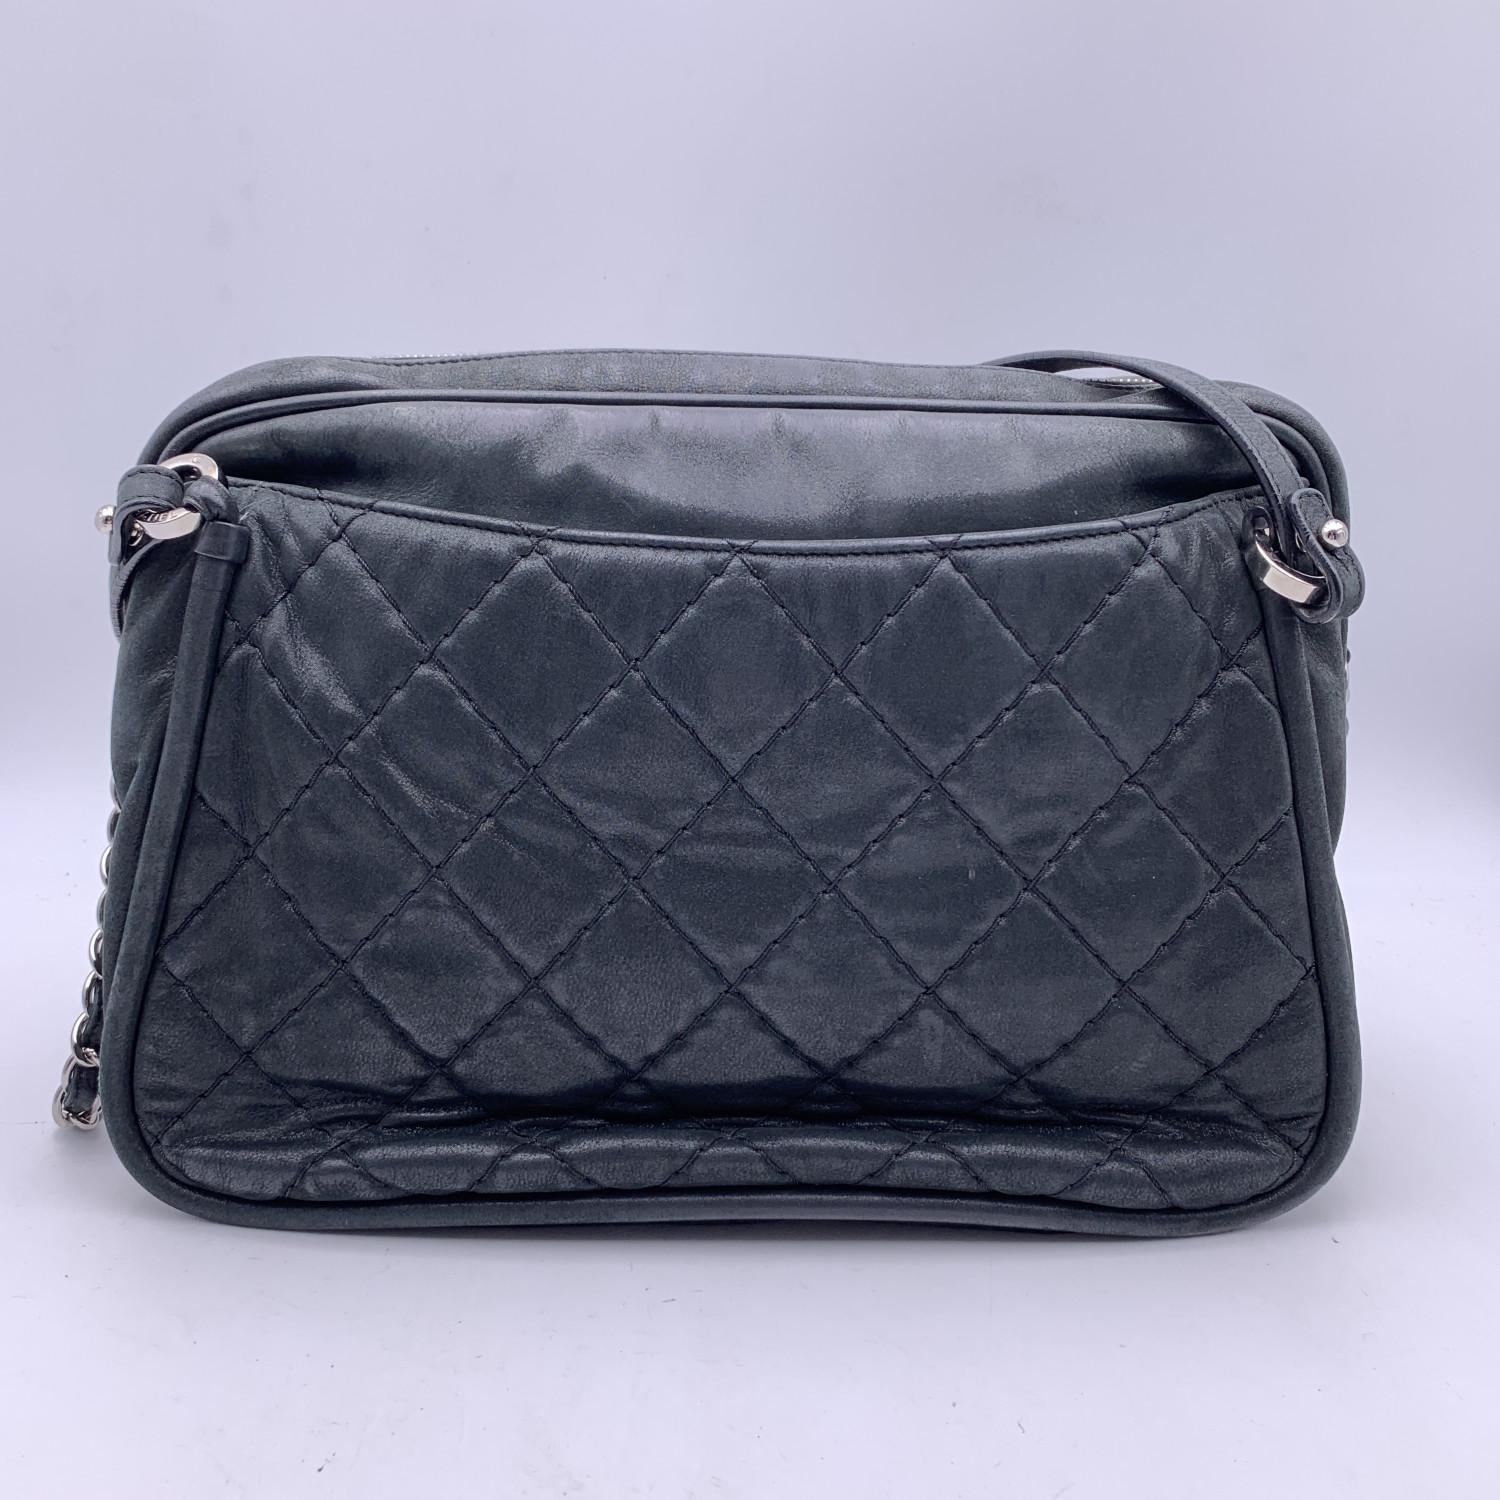 Chanel Black Quilted Leather Relax CC Tote Camera Shoulder Bag 7